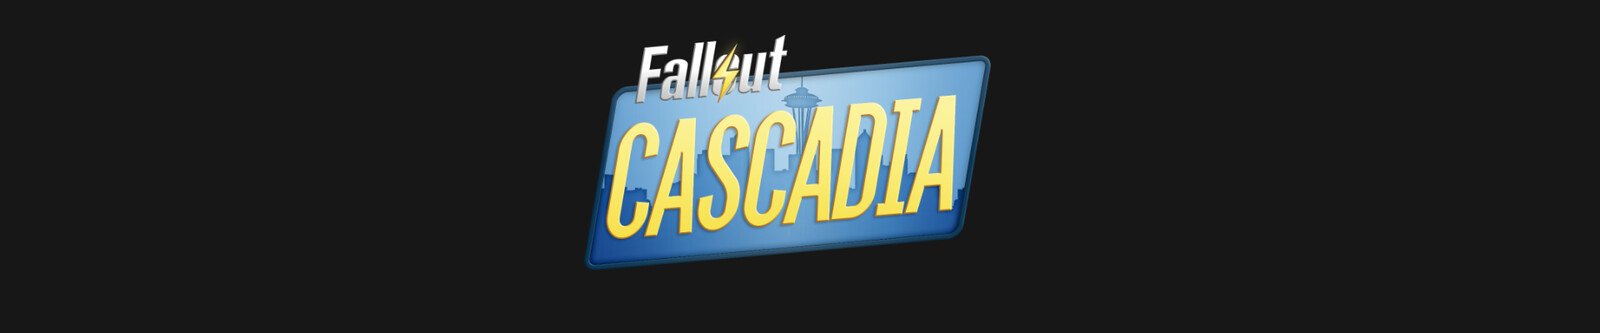 Go check out Fallout: Cascadia at: http://www.falloutcascadia.com/ and Cascadia Community Discord: https://discordapp.com/invite/FalloutCascadia